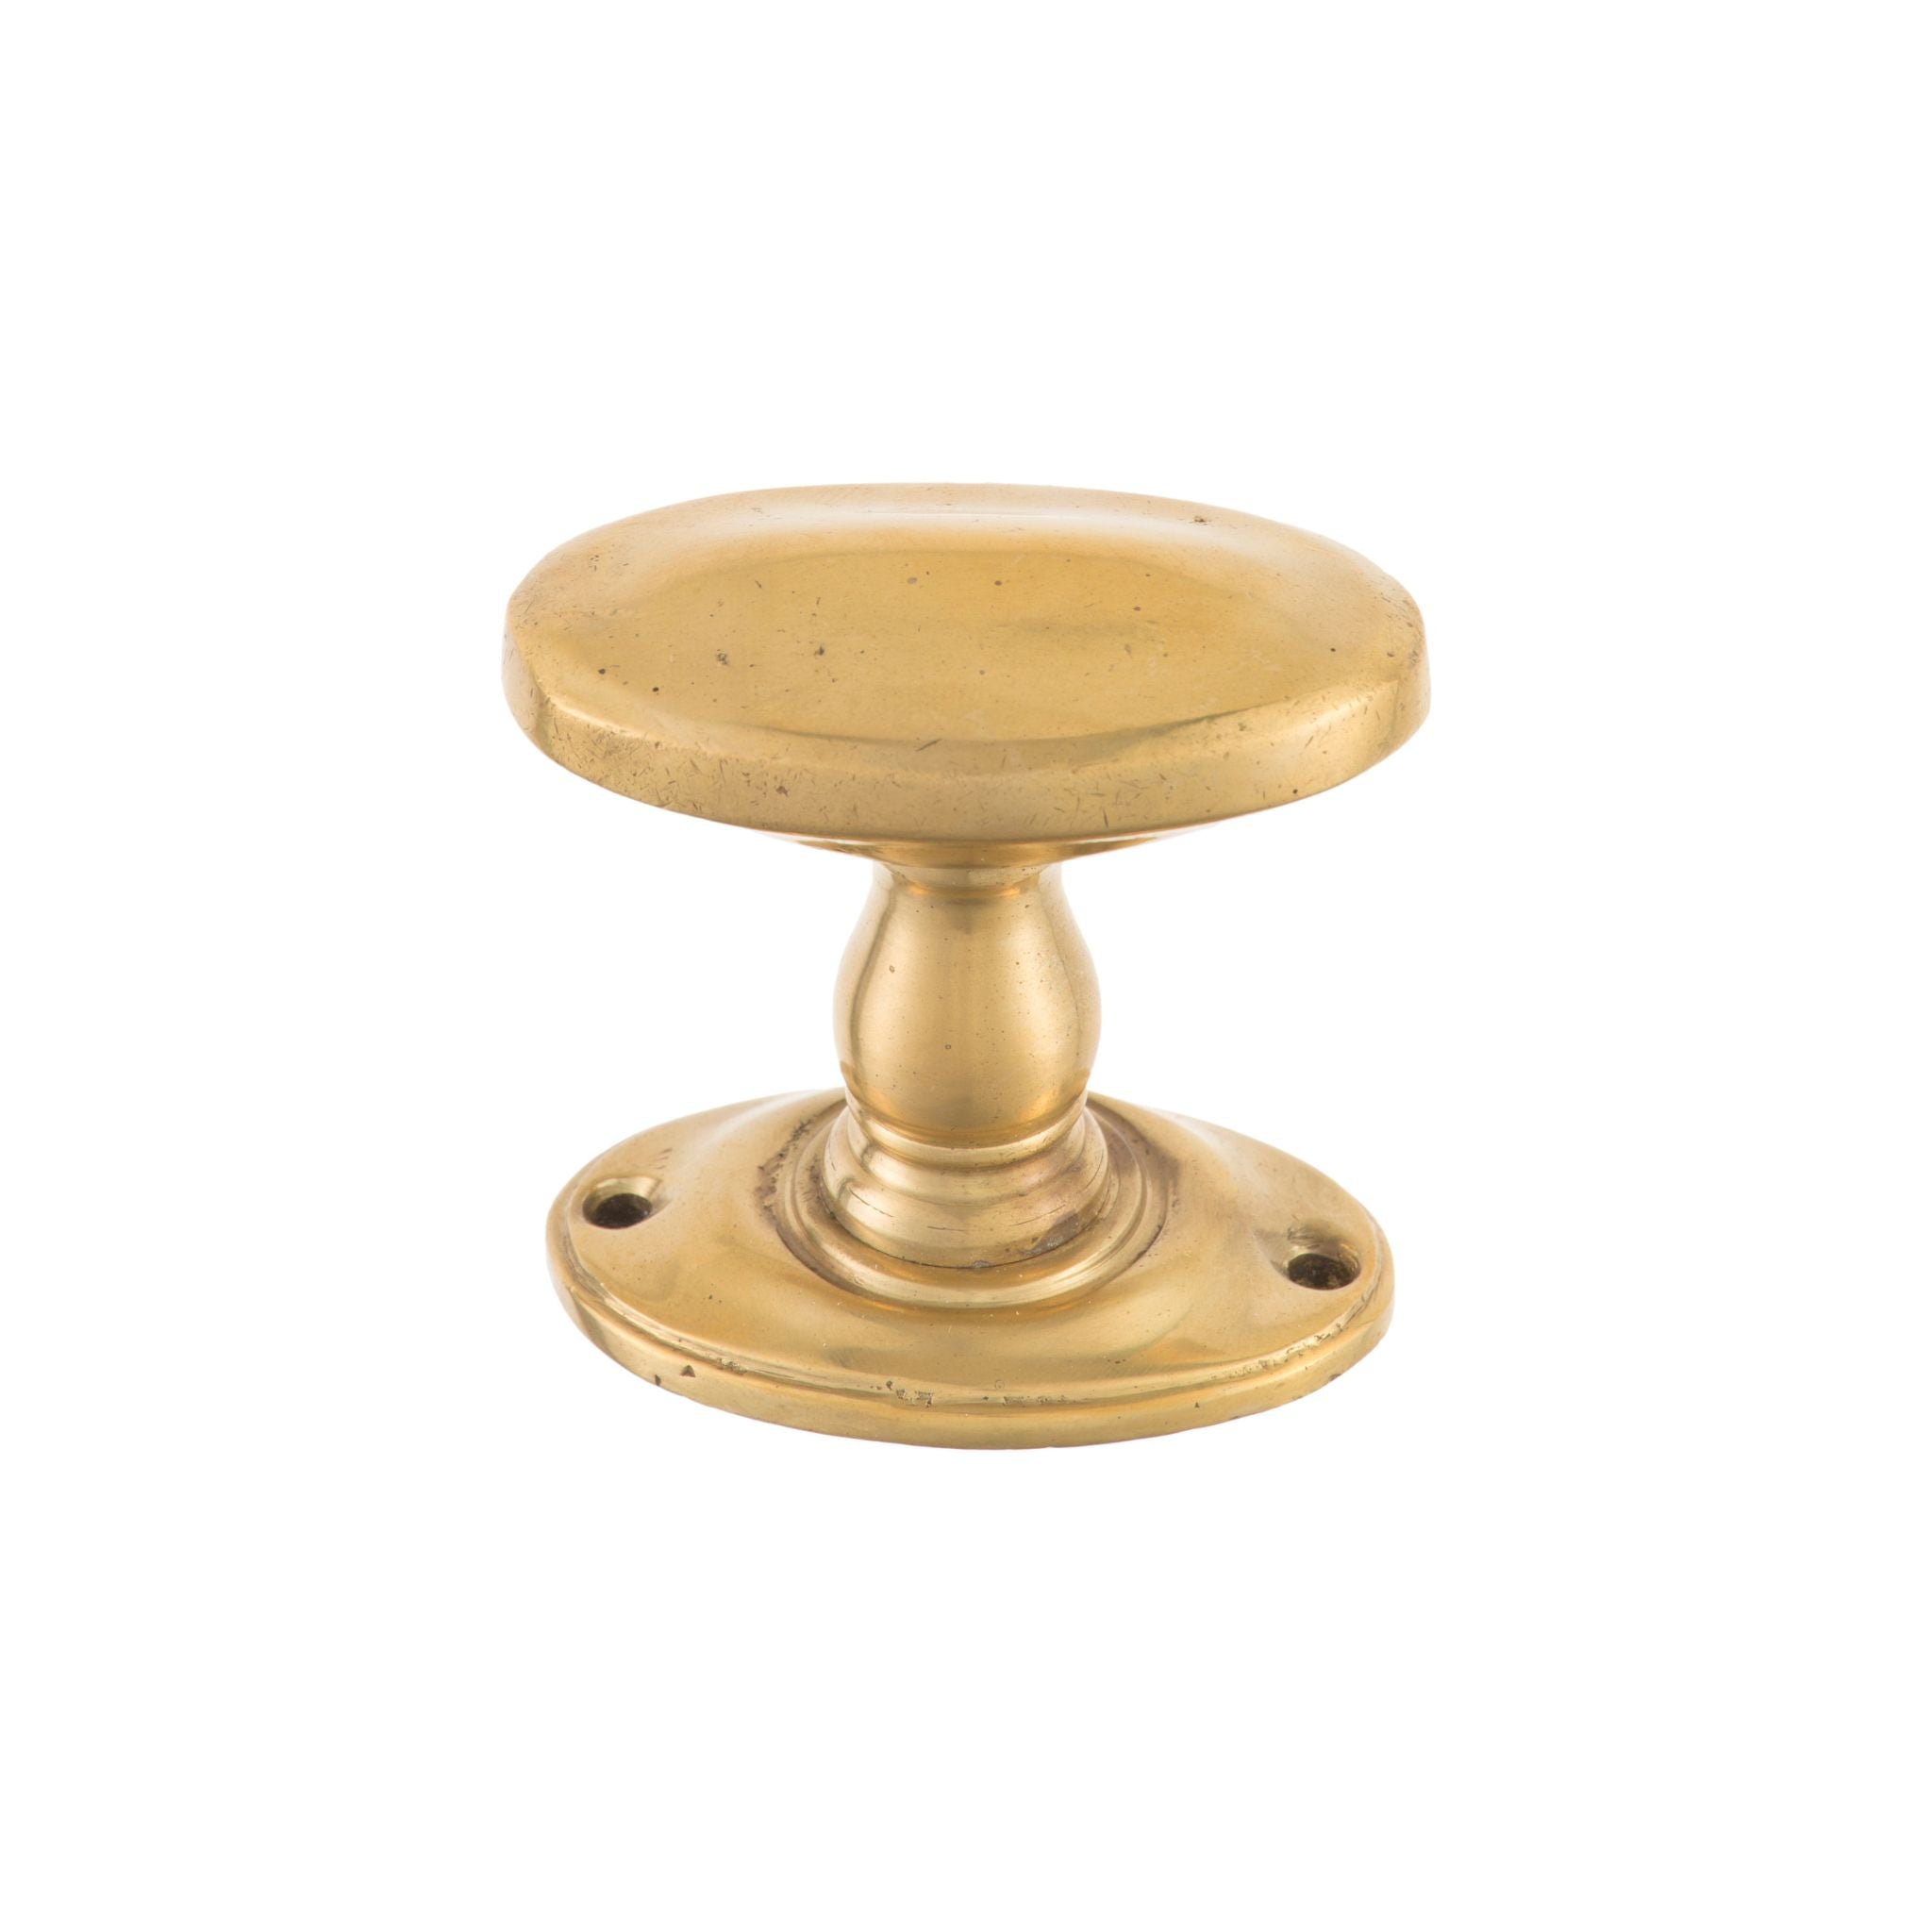 Oval brass knob with a smooth, polished finish, suitable for cabinets, drawers, and doors.